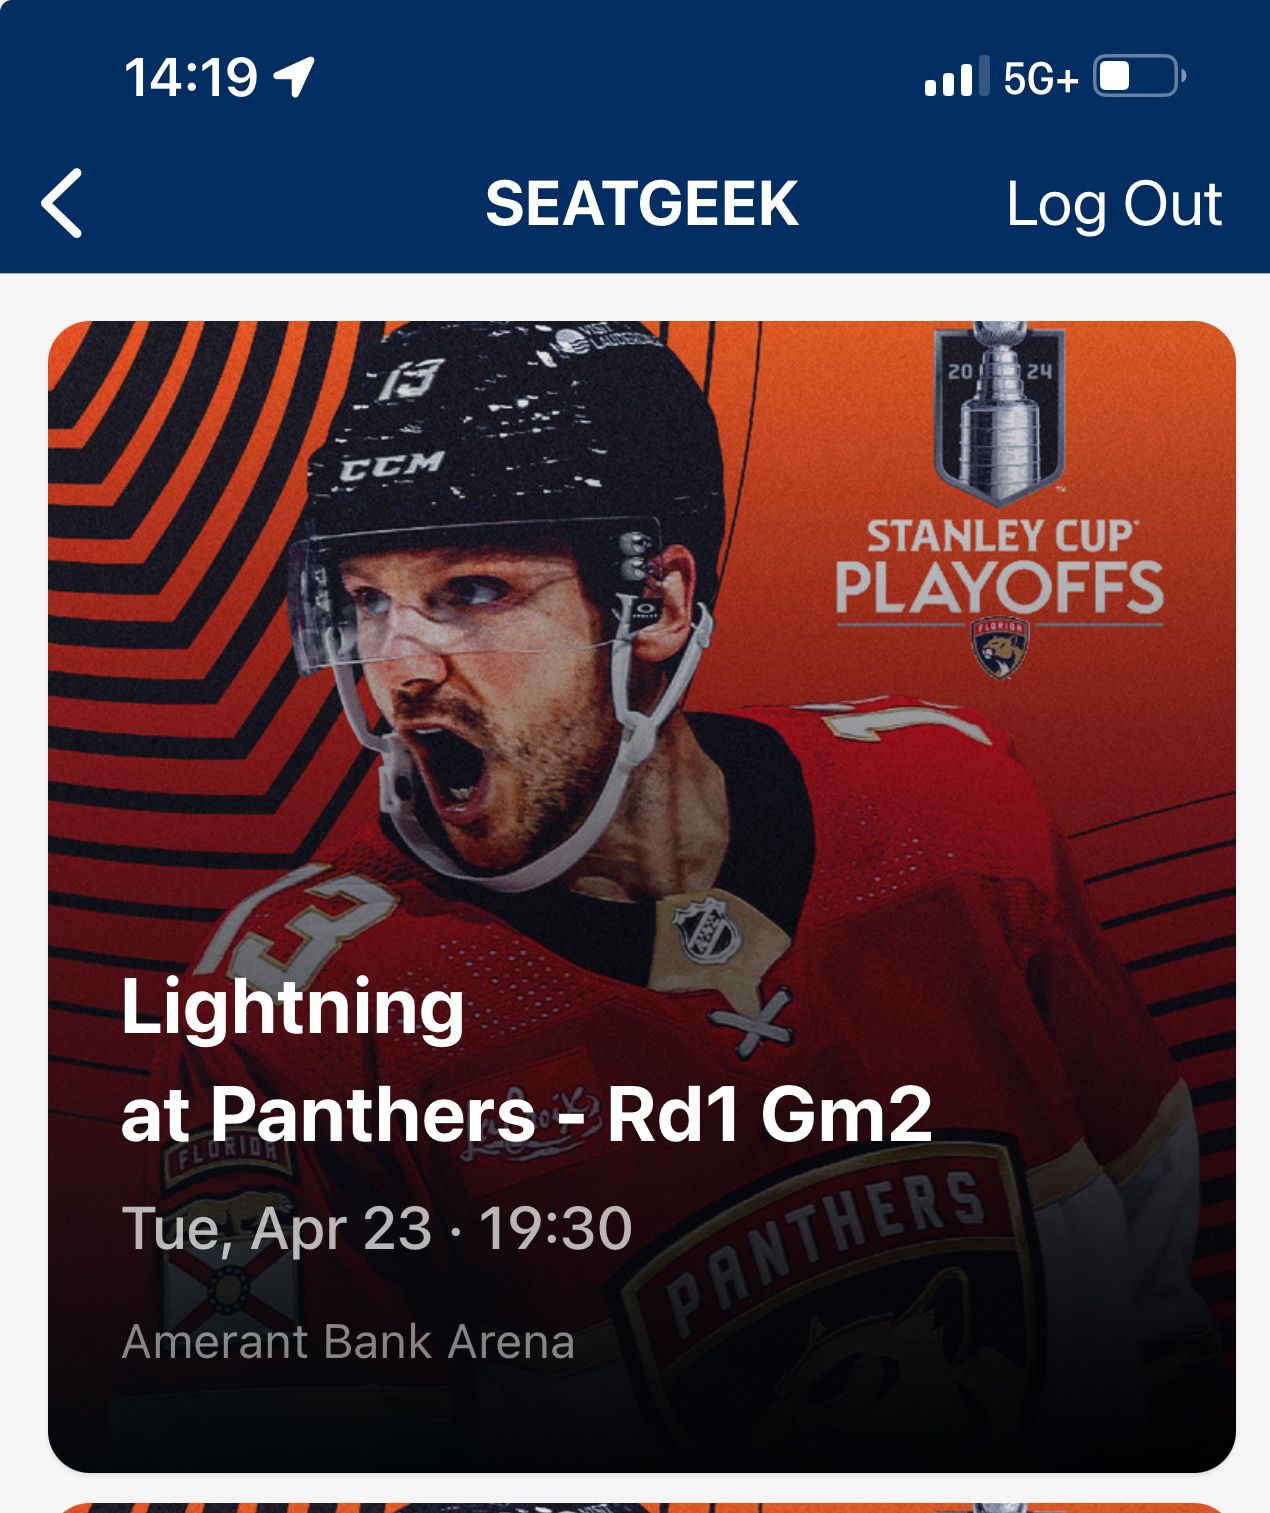 Florida Panthers vs Toronto Maple Leafs-Game 2 $100 For 2 Seats. 